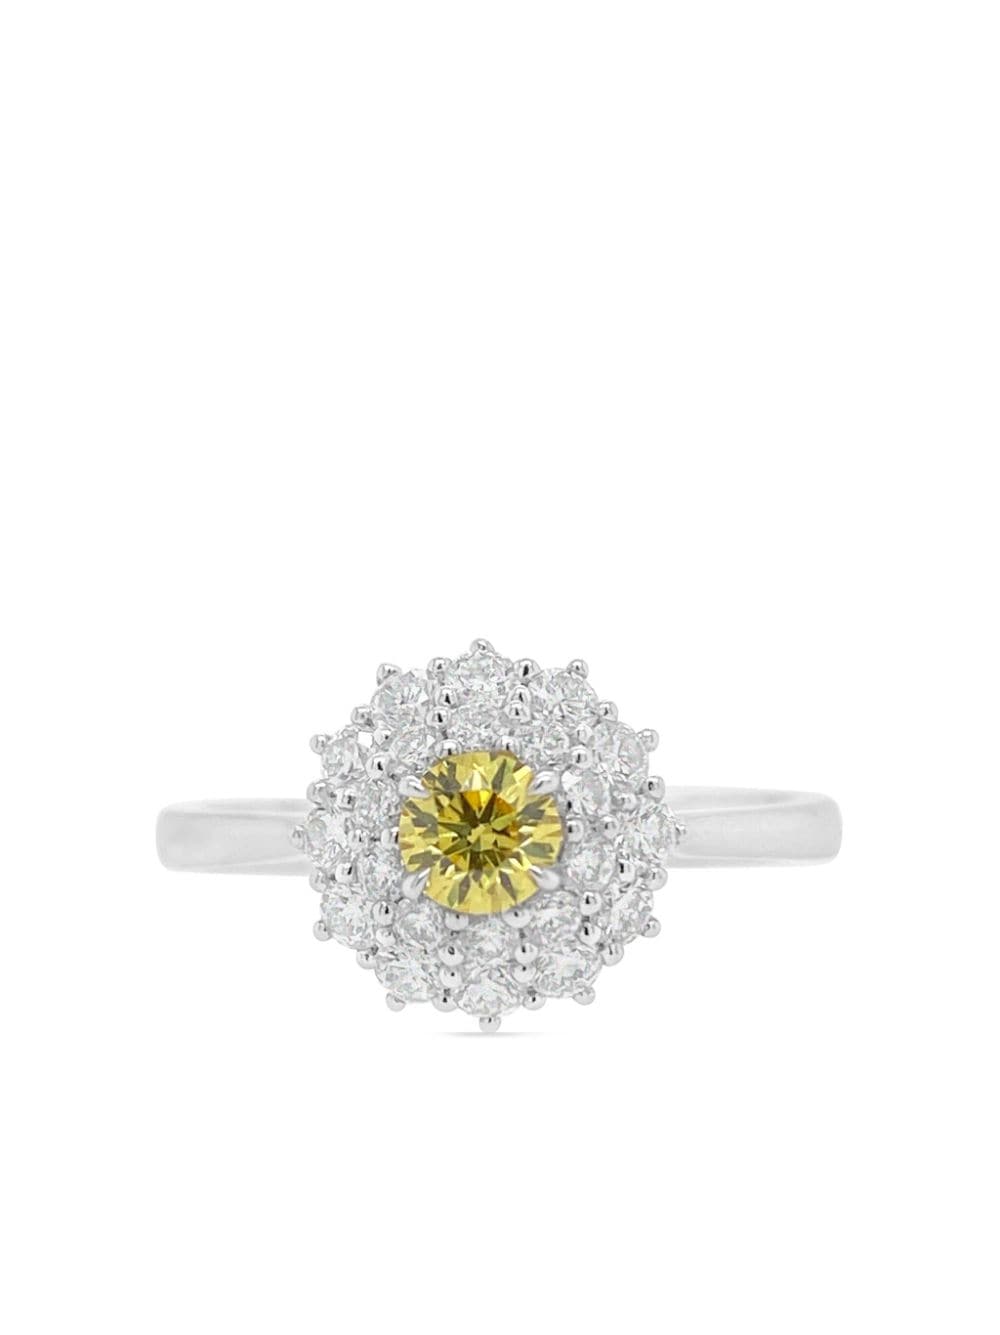 Hyt Jewelry Platinum White And Yellow Diamond Ring In Silver